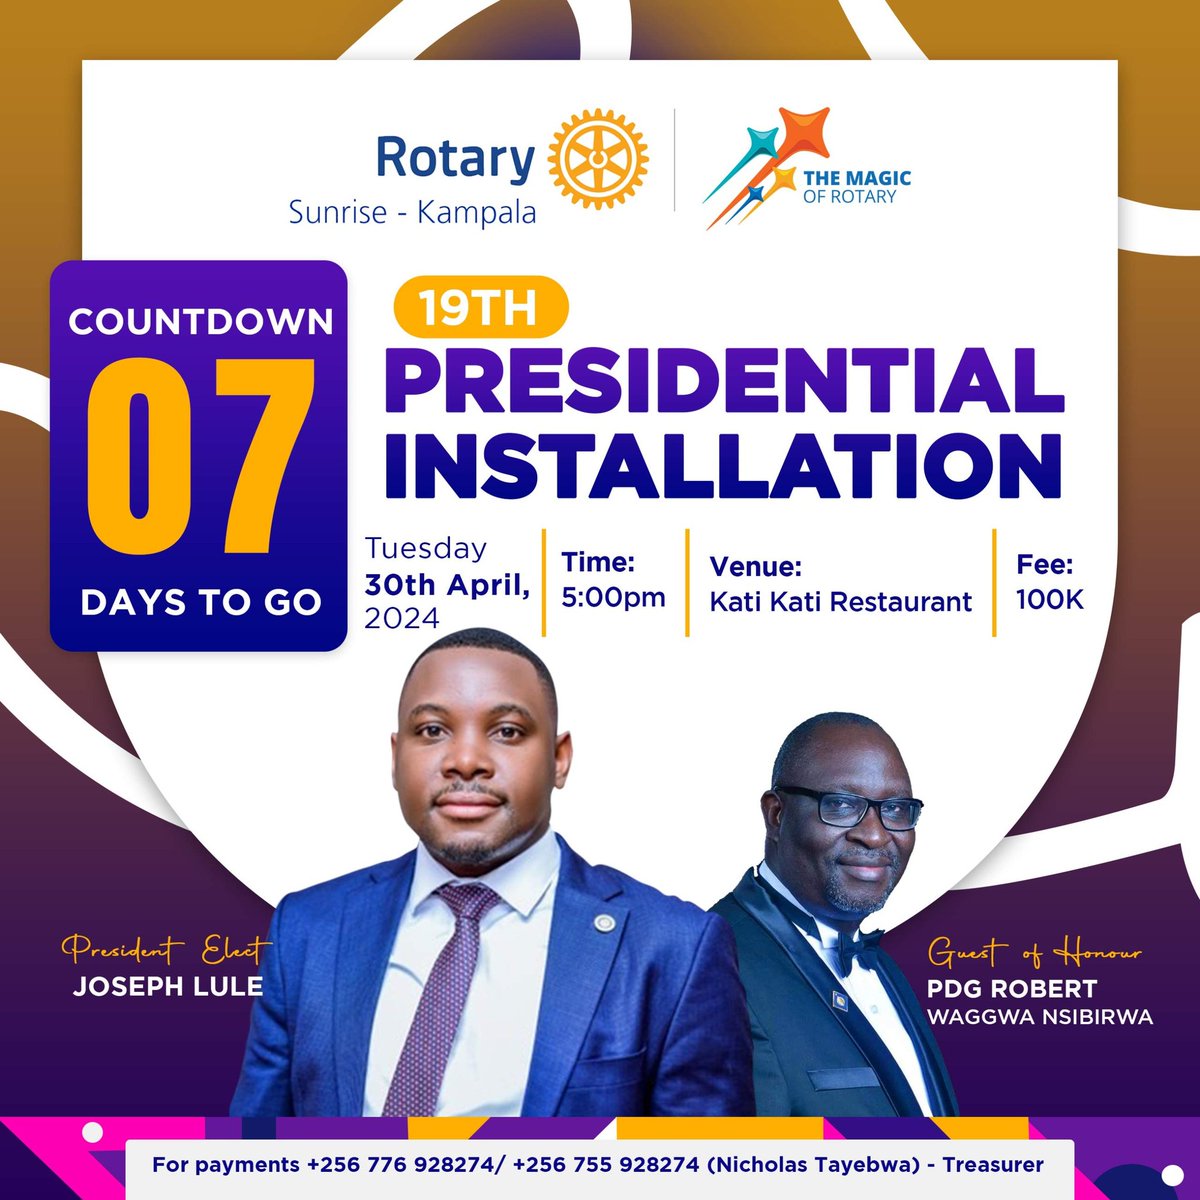 Yes it will be at Kati kati restaurant at 5pm sharp. You dont need to miss this one because it will indeed be magical. Come catch the @RotaryClubofSu2 vibe. Book your ticket today with just 7 days to go. #19ThPresidentialInstallation